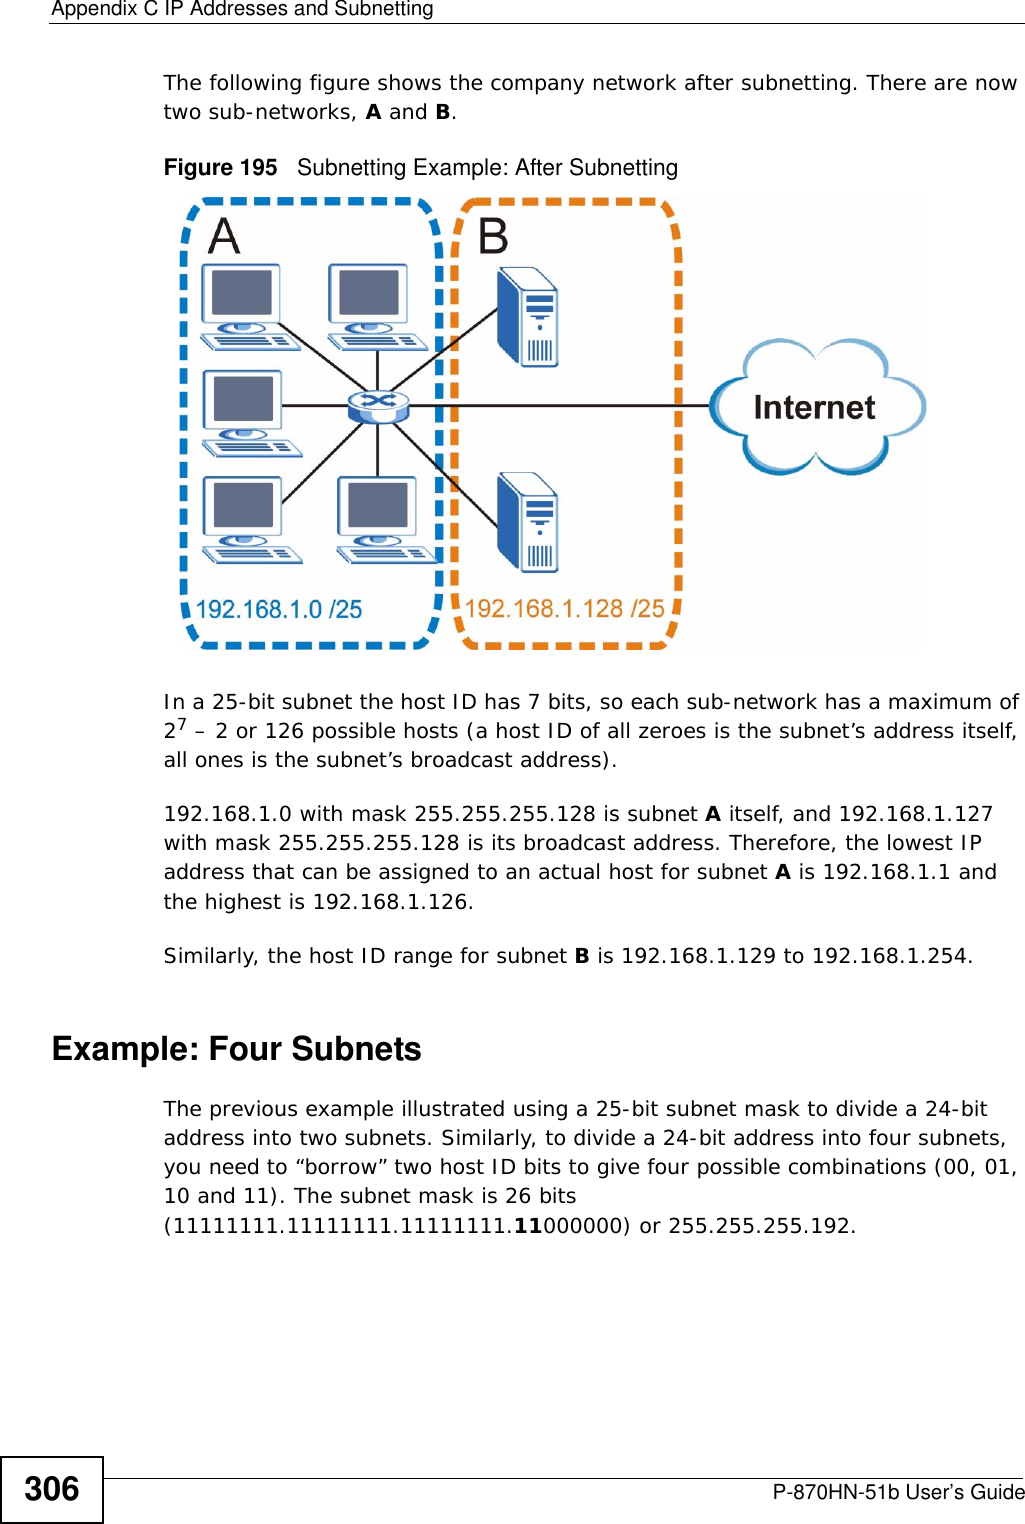 Appendix C IP Addresses and SubnettingP-870HN-51b User’s Guide306The following figure shows the company network after subnetting. There are now two sub-networks, A and B. Figure 195   Subnetting Example: After SubnettingIn a 25-bit subnet the host ID has 7 bits, so each sub-network has a maximum of 27 – 2 or 126 possible hosts (a host ID of all zeroes is the subnet’s address itself, all ones is the subnet’s broadcast address).192.168.1.0 with mask 255.255.255.128 is subnet A itself, and 192.168.1.127 with mask 255.255.255.128 is its broadcast address. Therefore, the lowest IP address that can be assigned to an actual host for subnet A is 192.168.1.1 and the highest is 192.168.1.126. Similarly, the host ID range for subnet B is 192.168.1.129 to 192.168.1.254.Example: Four Subnets The previous example illustrated using a 25-bit subnet mask to divide a 24-bit address into two subnets. Similarly, to divide a 24-bit address into four subnets, you need to “borrow” two host ID bits to give four possible combinations (00, 01, 10 and 11). The subnet mask is 26 bits (11111111.11111111.11111111.11000000) or 255.255.255.192. 